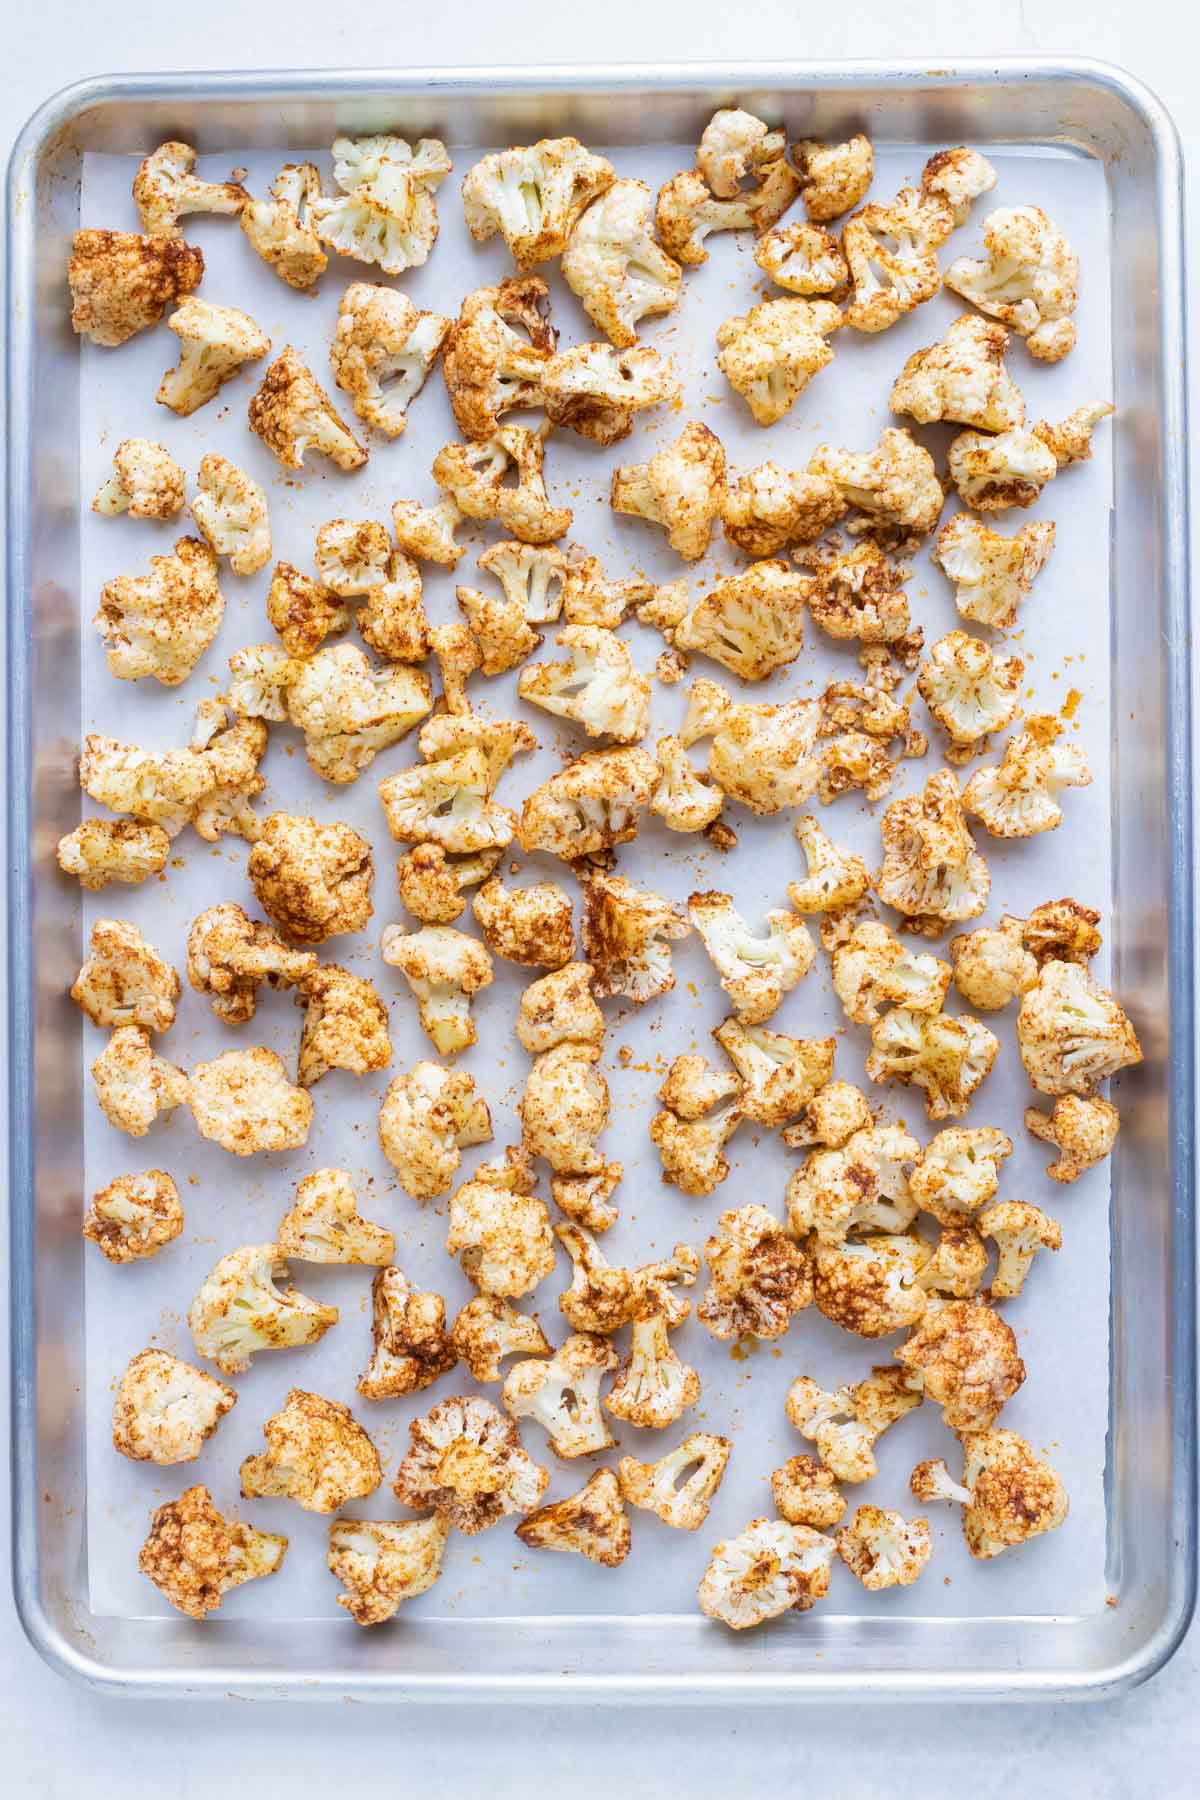 Cauliflower coated in taco seasoning on a baking sheet before roasting in the oven.